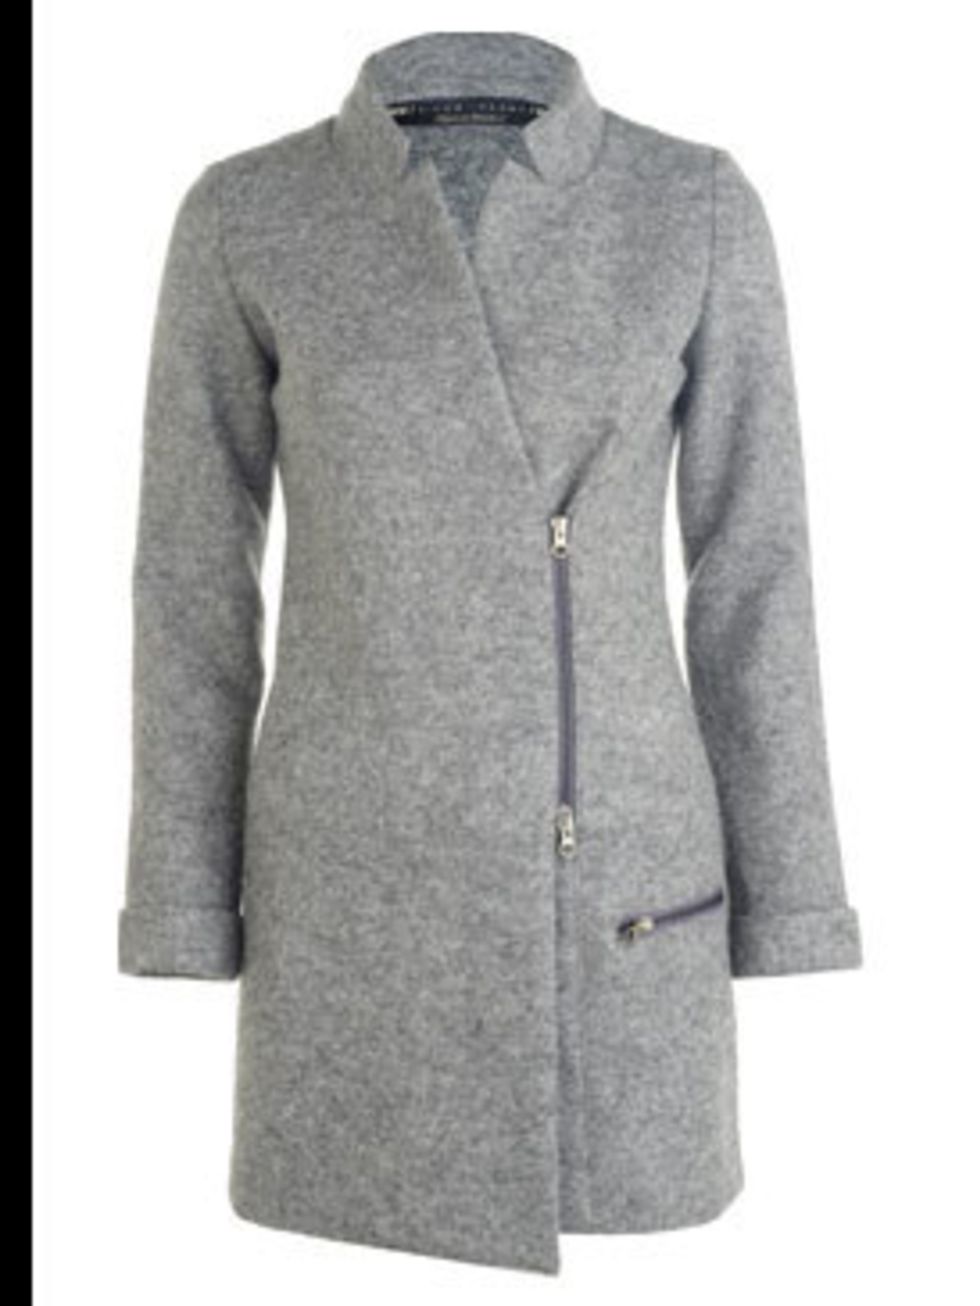 <p>Grey wool coat, £69.99, by <a href="http://xml.riverisland.com/flash/content.php">River Island</a></p>